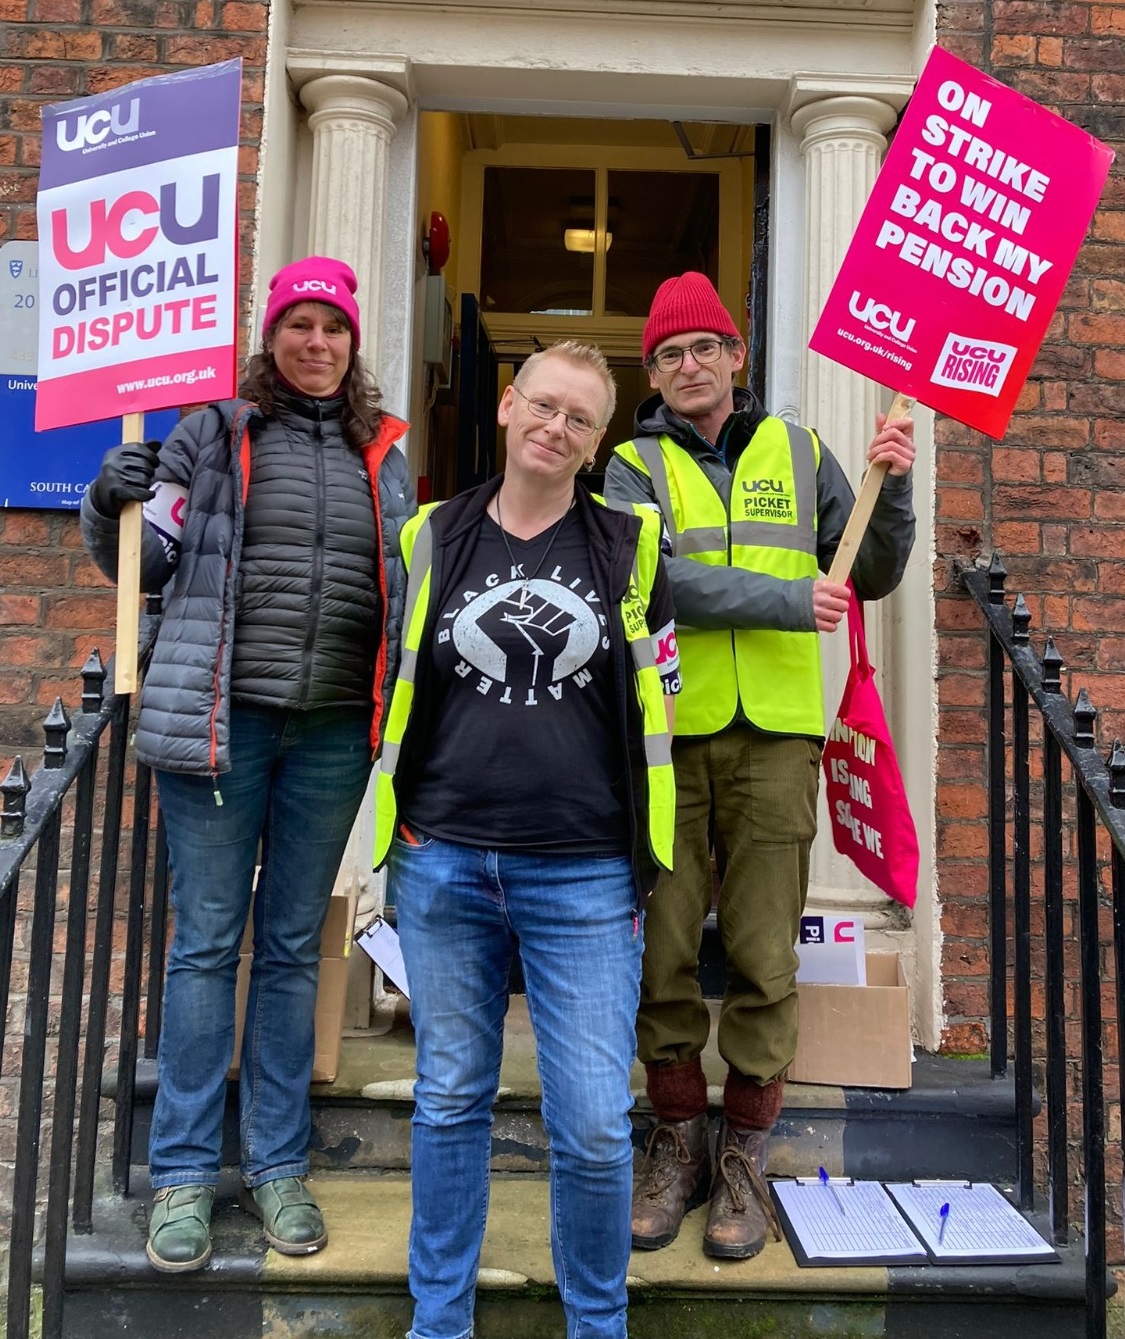 Branch president Peta and members holding placards reading 'UCU official dispute' and 'On strike to win back my pension' outside the UoL UCU office.